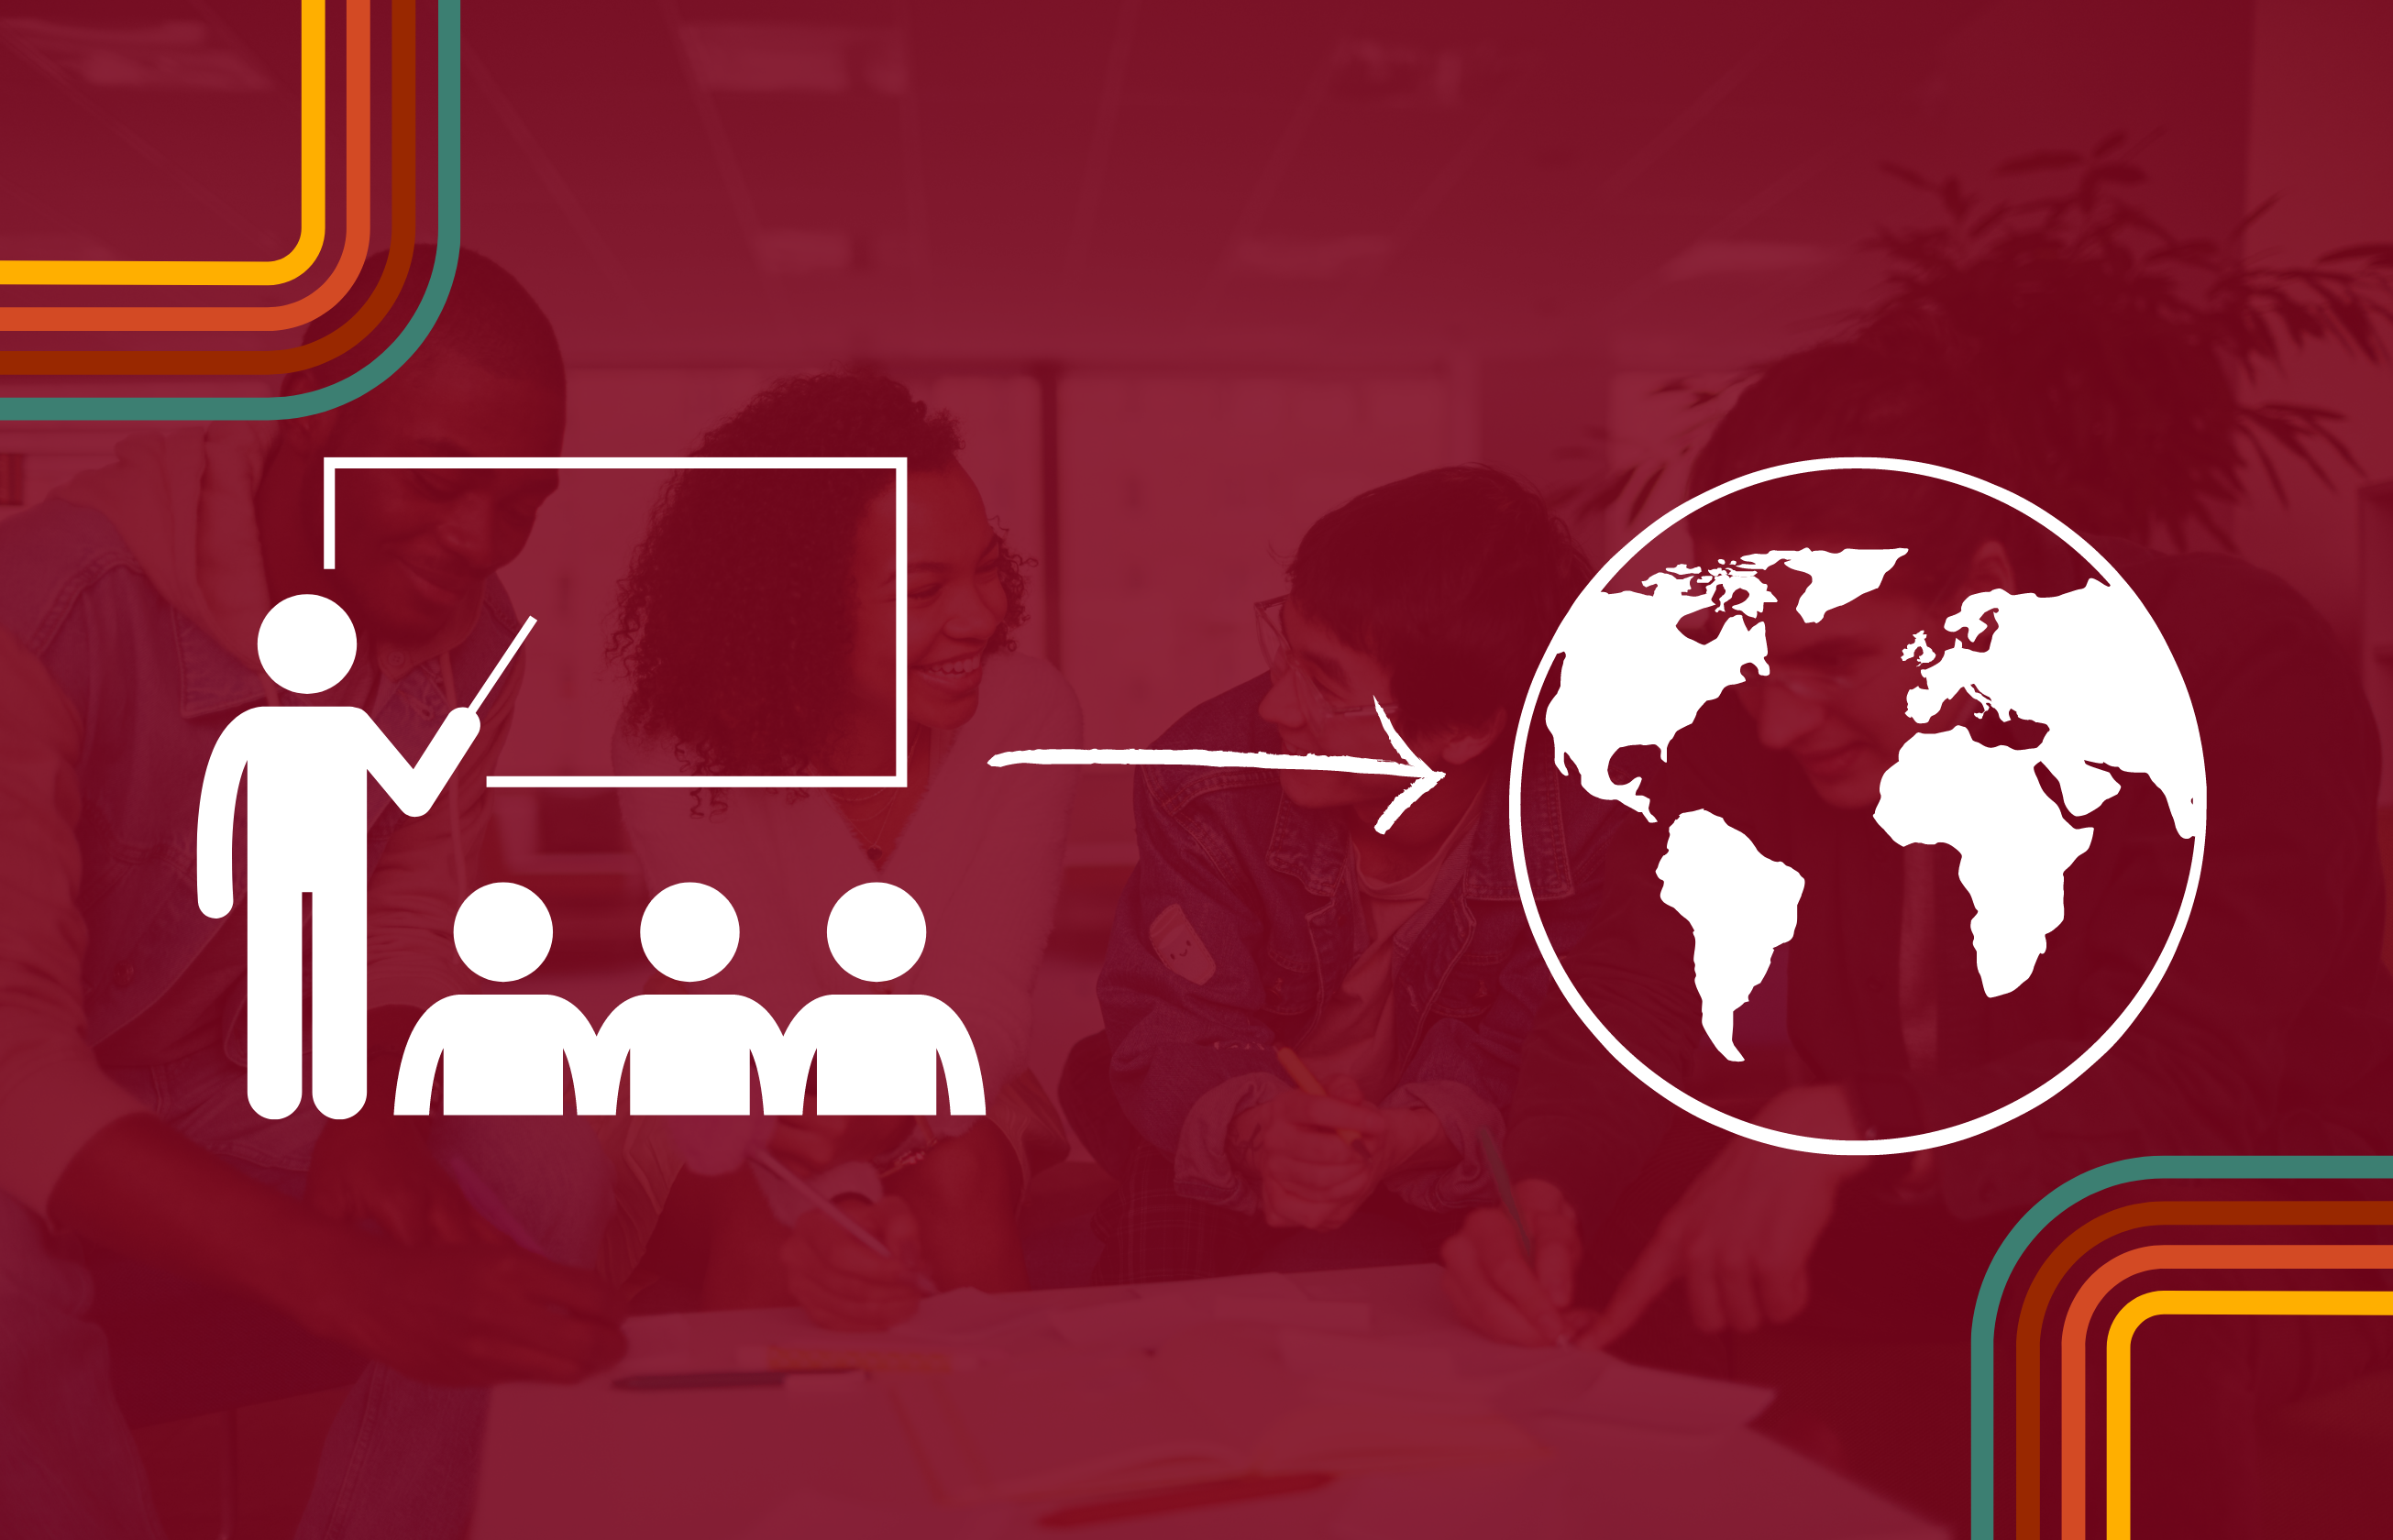 Stick figure people in a classroom with an arrow pointing to a globe signifying how students work in the classroom can have real-world outcomes. Faint image of students working together in the background.